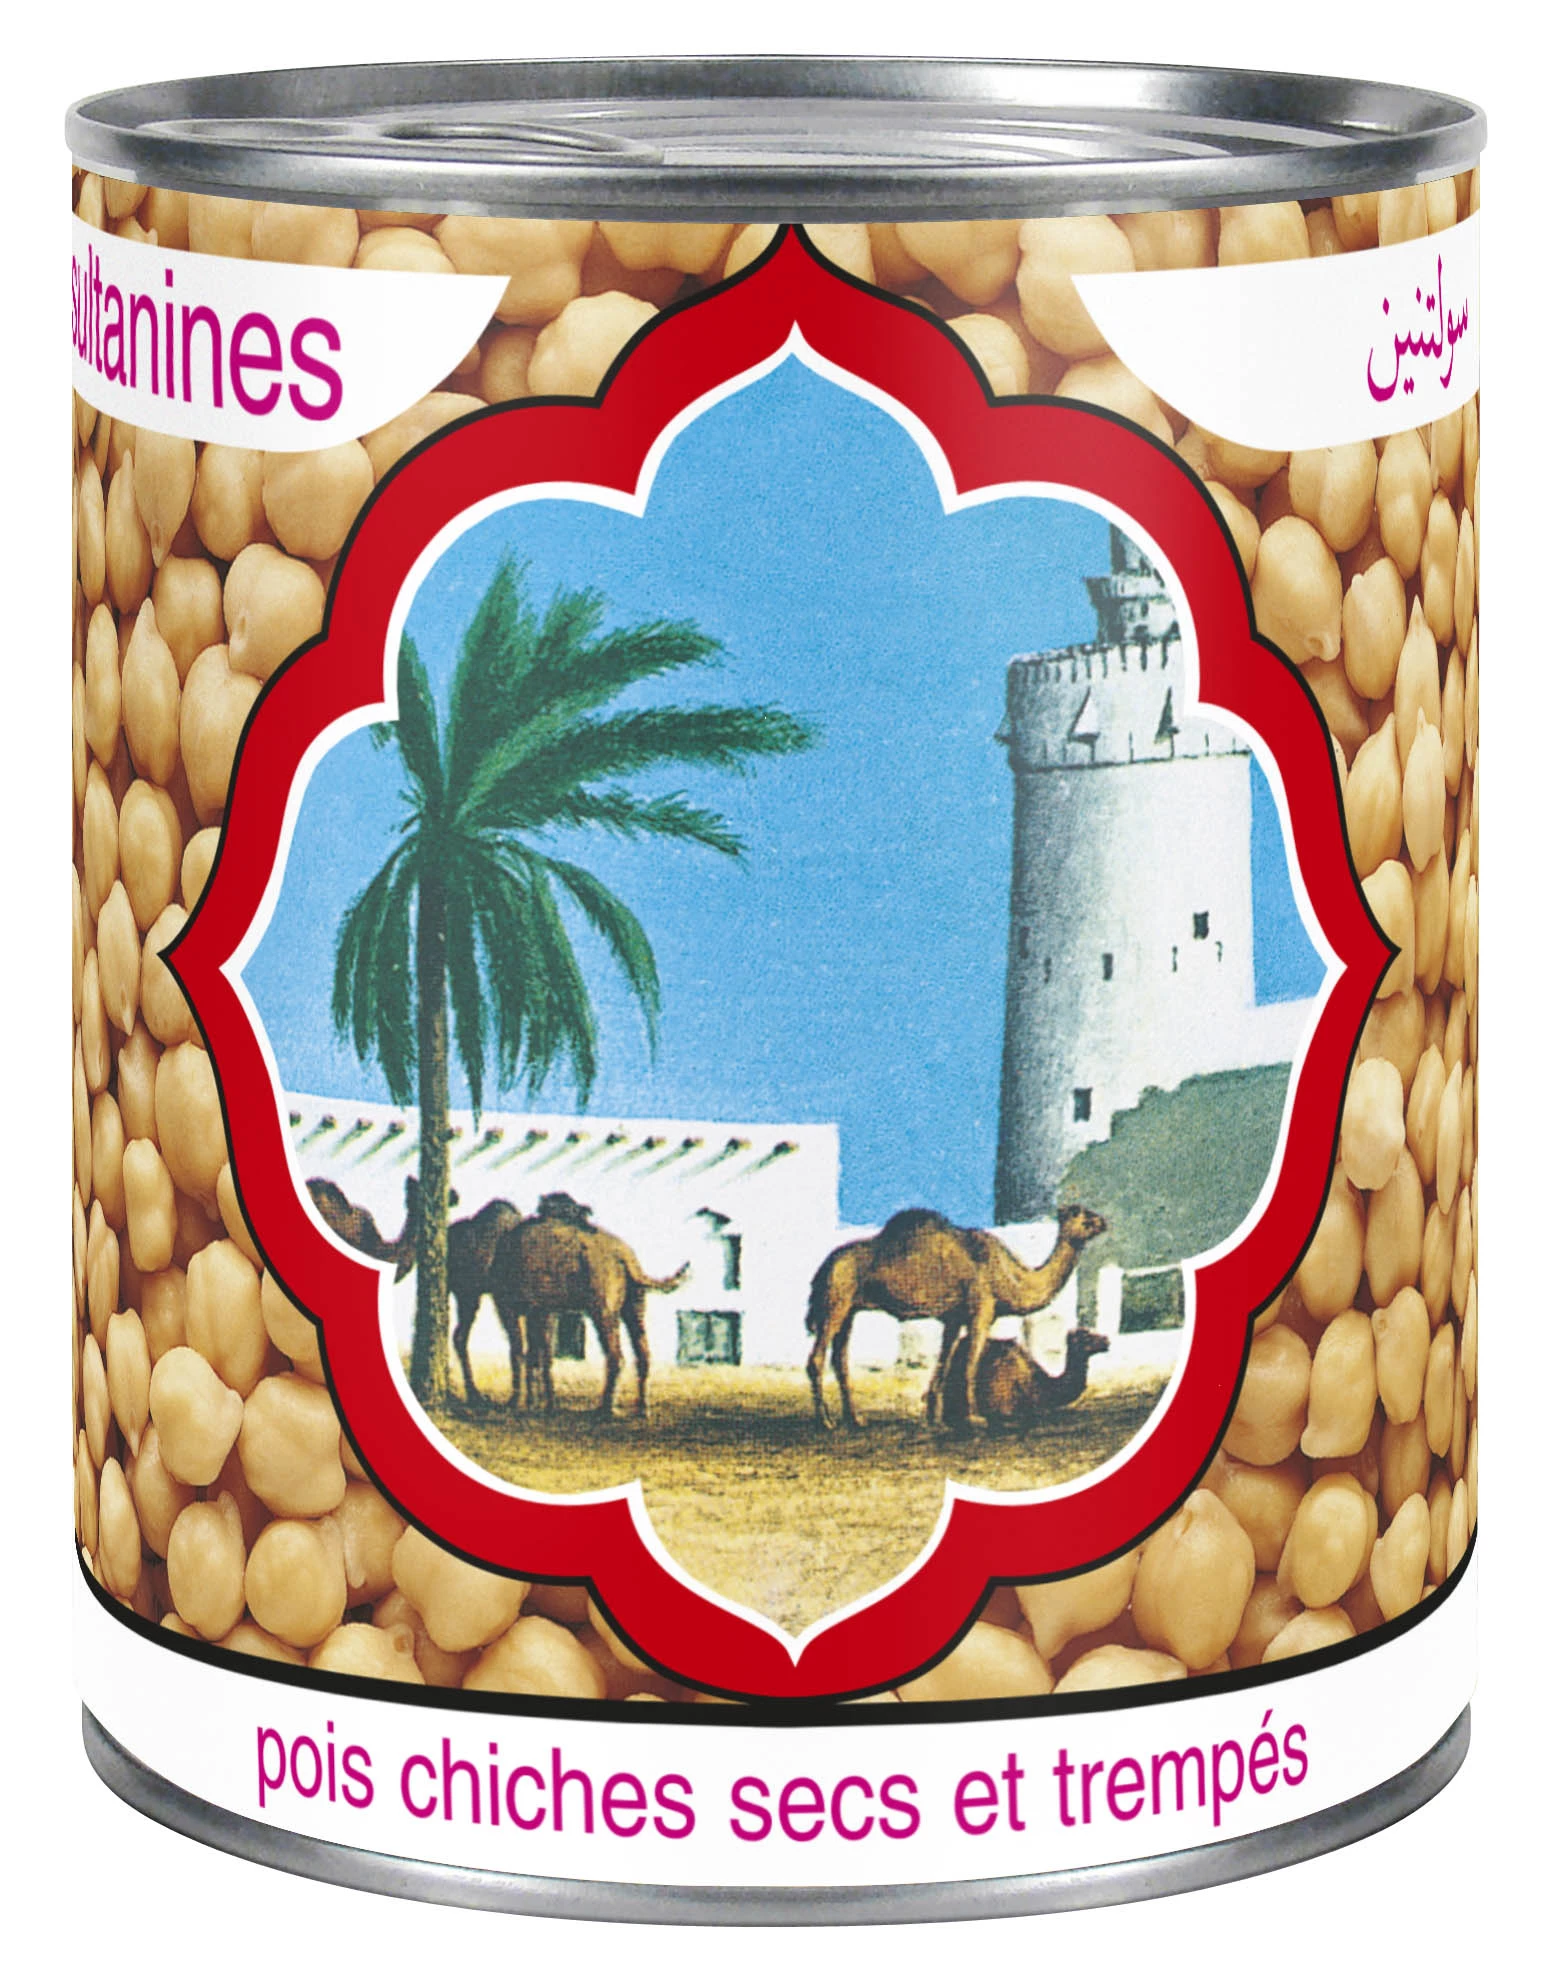 Chickpeas Sultanines, 530g - D'AUCY